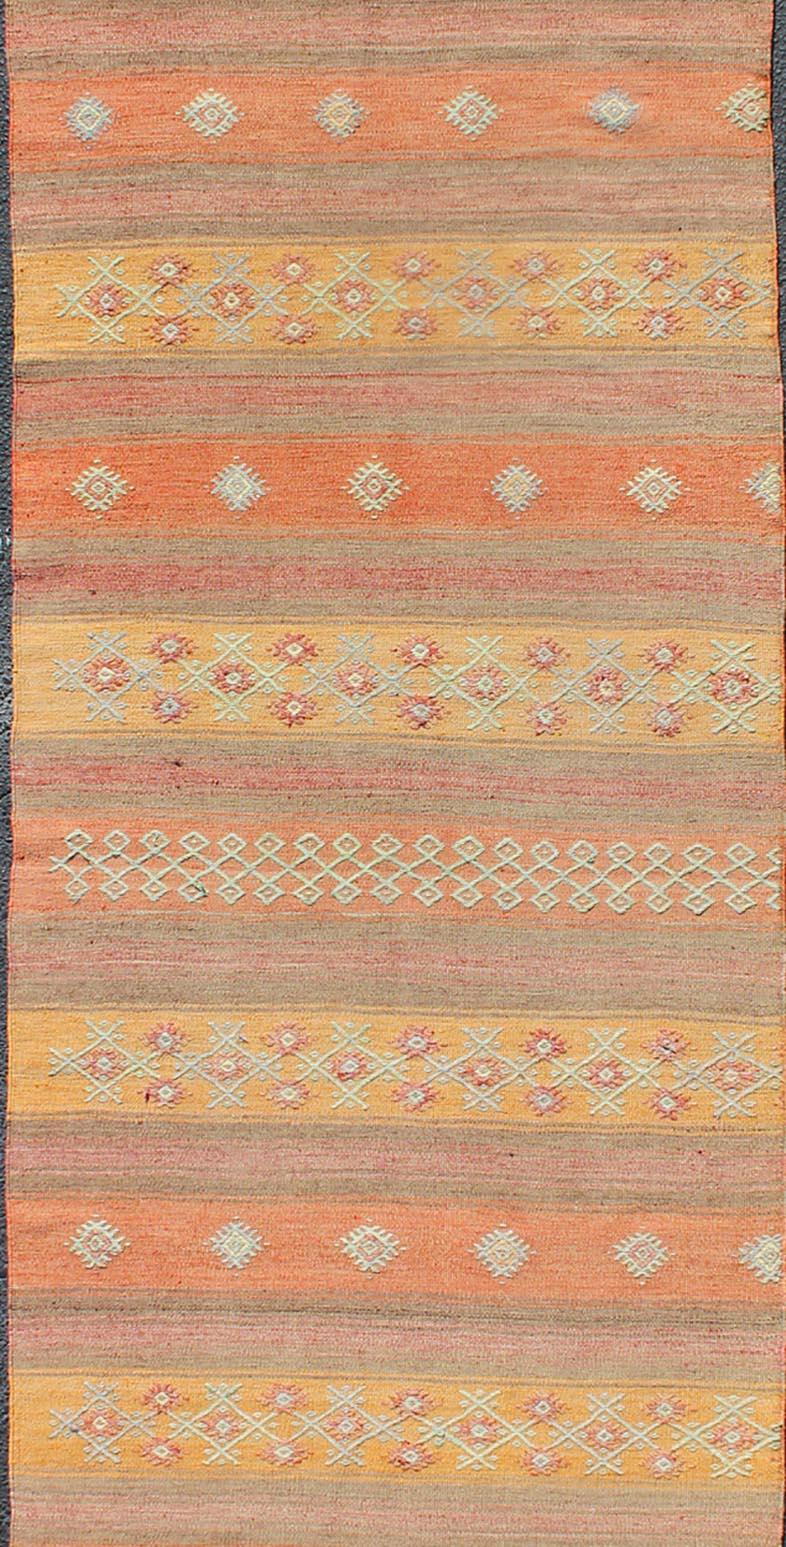 Colorful Vintage Turkish Kilim Rug with Horizontal Stripes and Geometric Shapes In Good Condition For Sale In Atlanta, GA